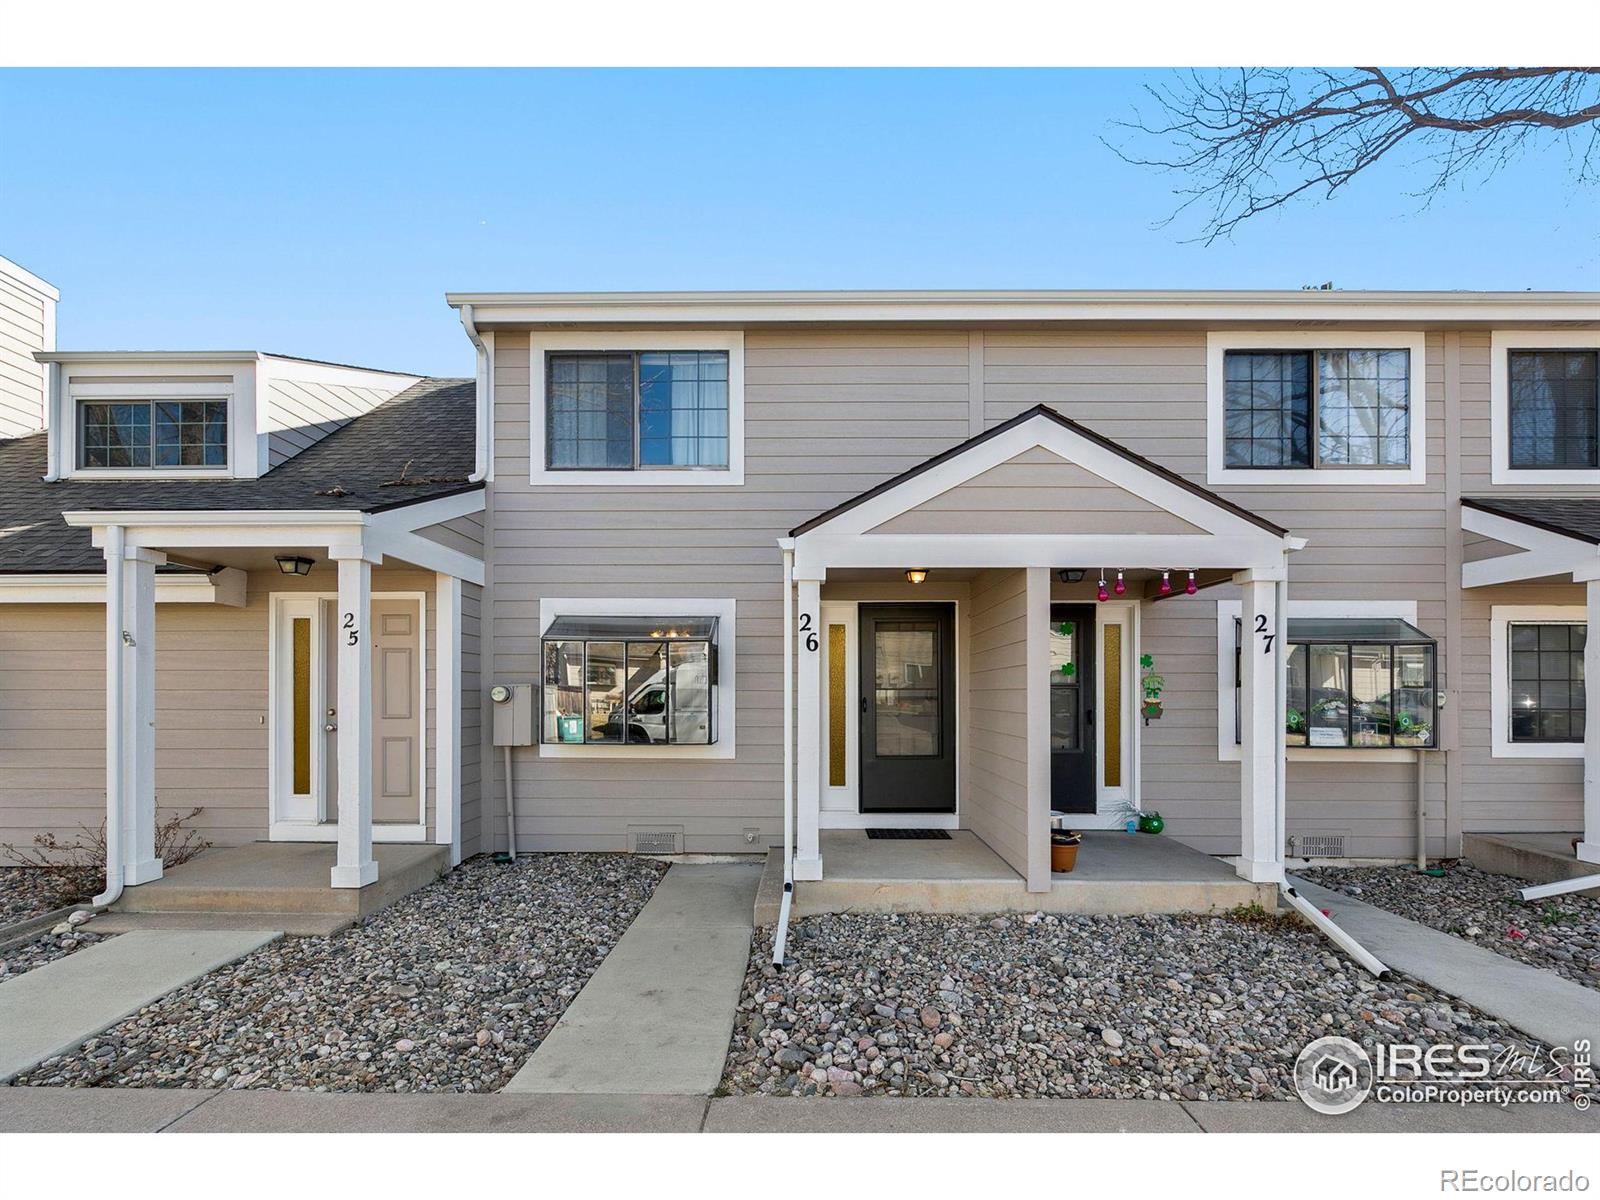 2924  Ross Drive, fort collins MLS: 4567891005638 Beds: 2 Baths: 2 Price: $315,000